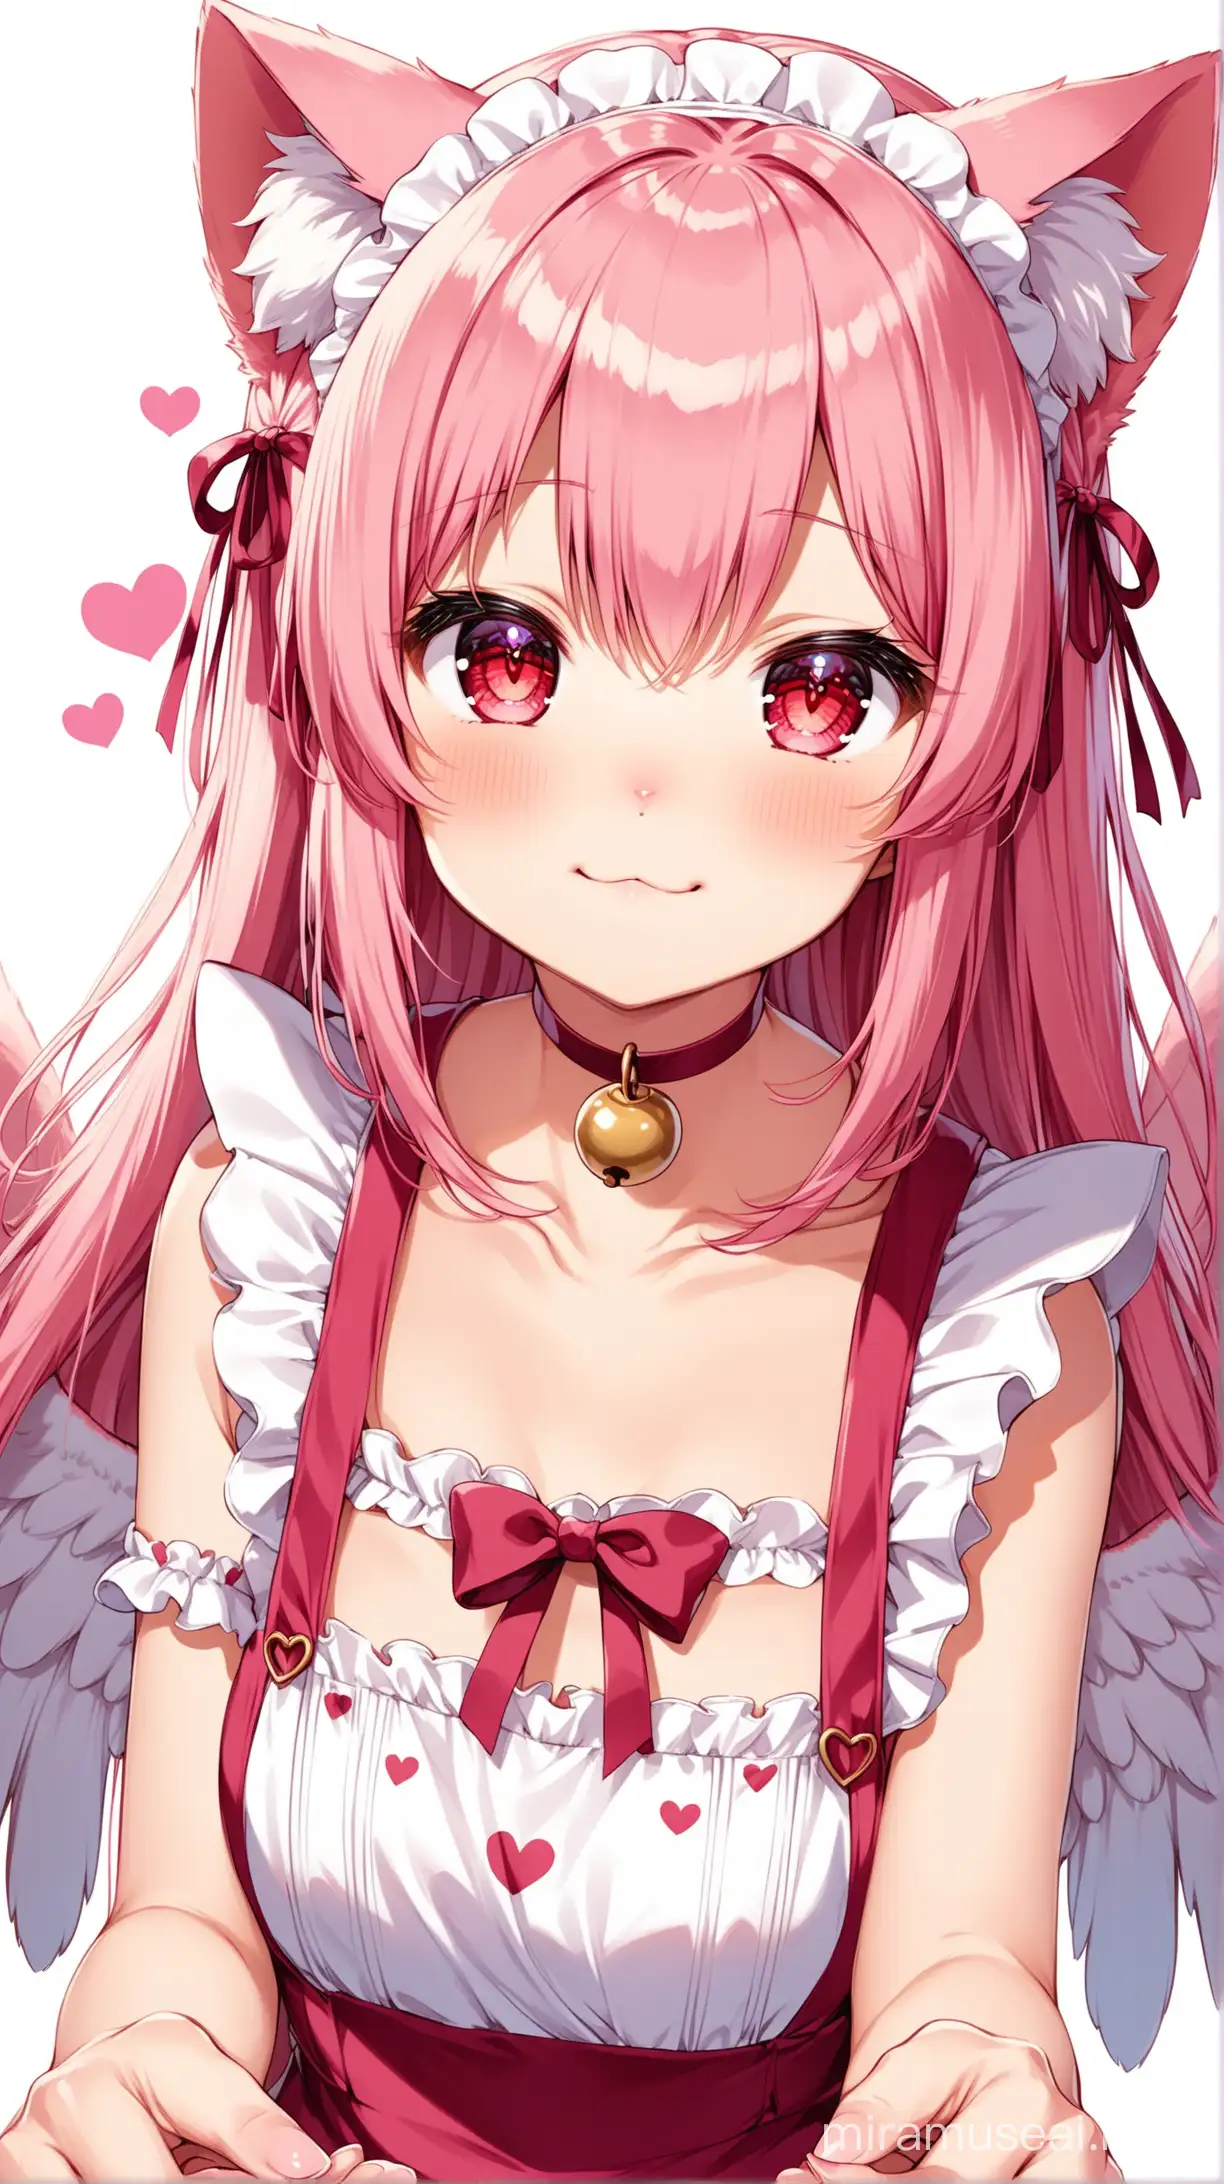 Anime Cat Girl in Pink Maid Outfit with Adorable Accessories